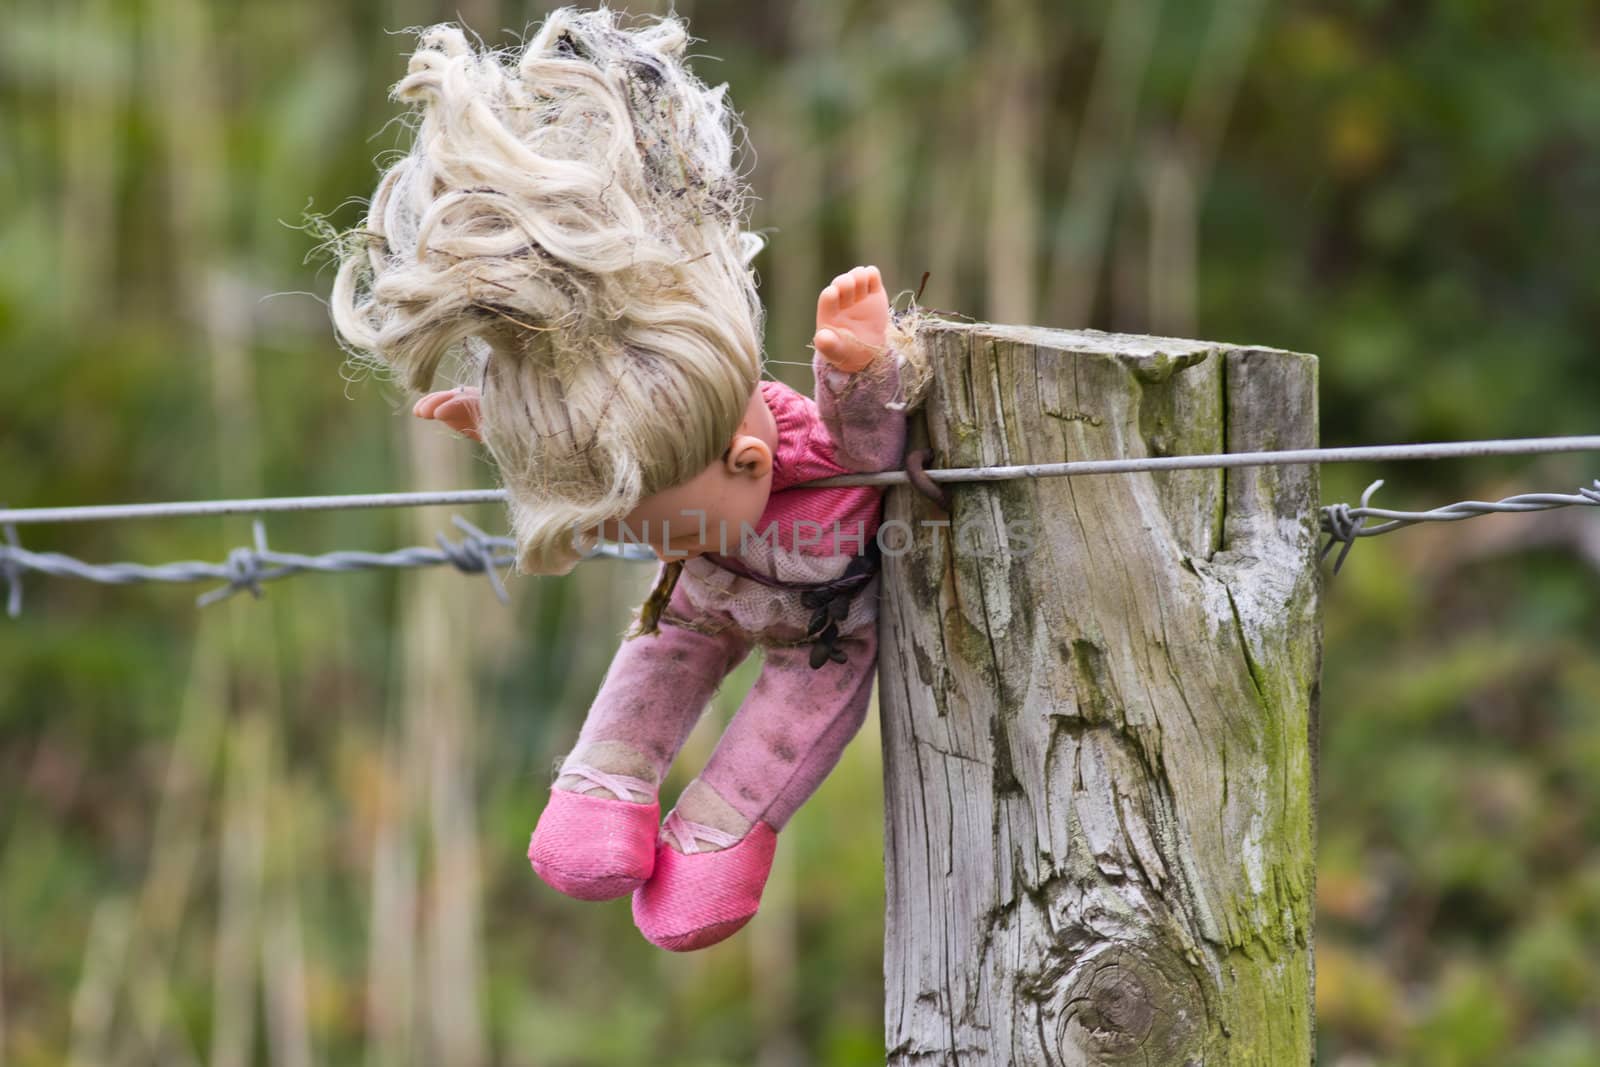 A childs lost doll caught up on a fence